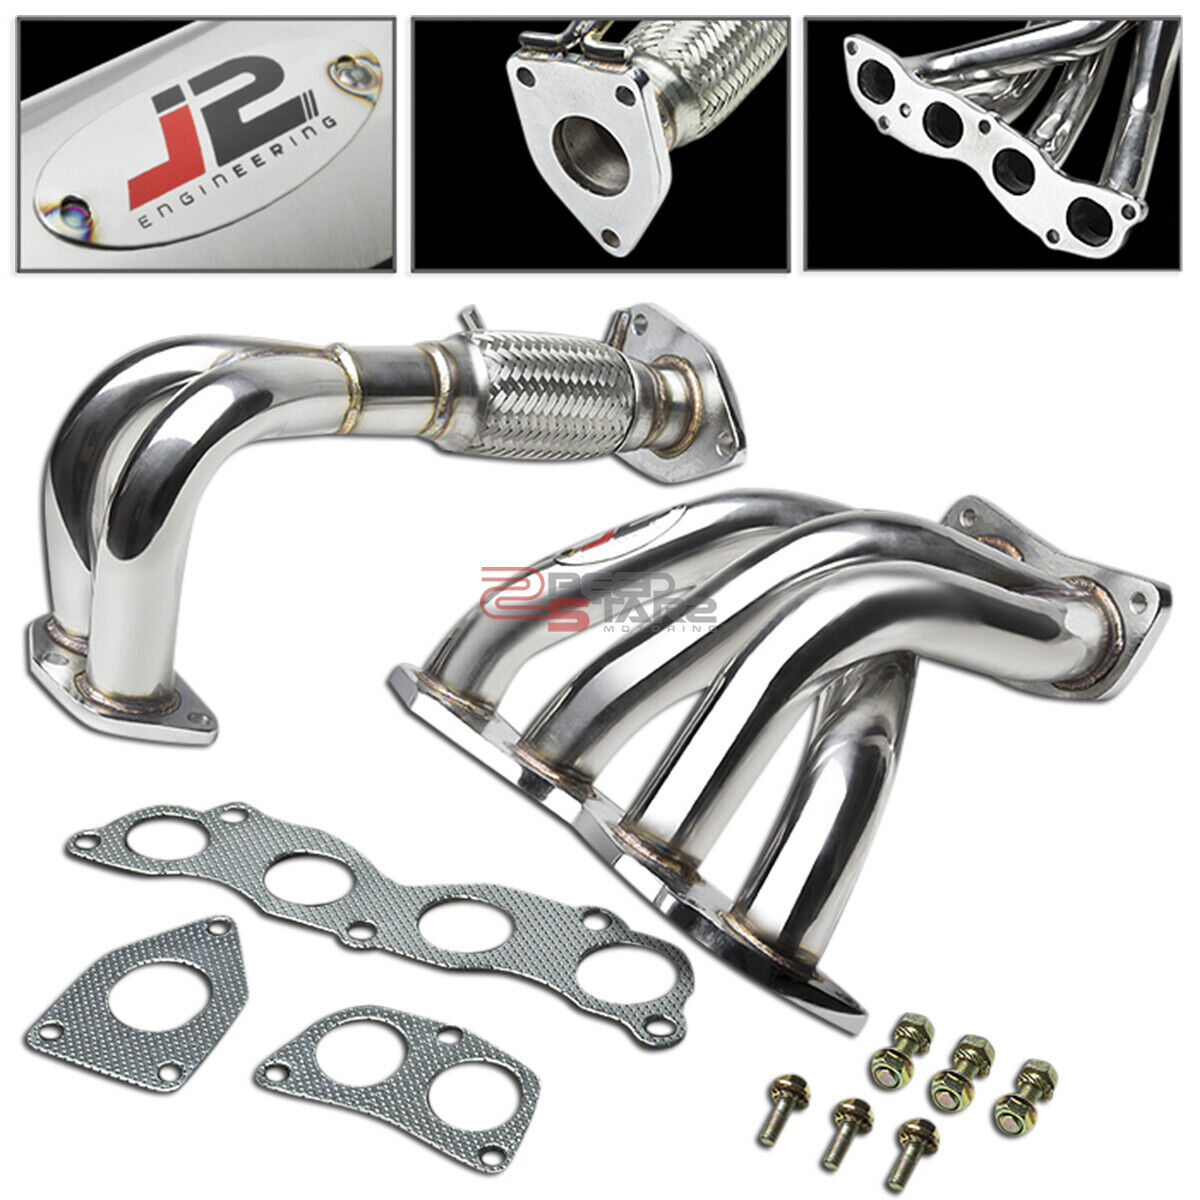 J2 PERFORMANCE STAINLESS STEEL MANIFOLD HEADER/EXHAUST 04-08 ACURA TSX CL9 K24A2